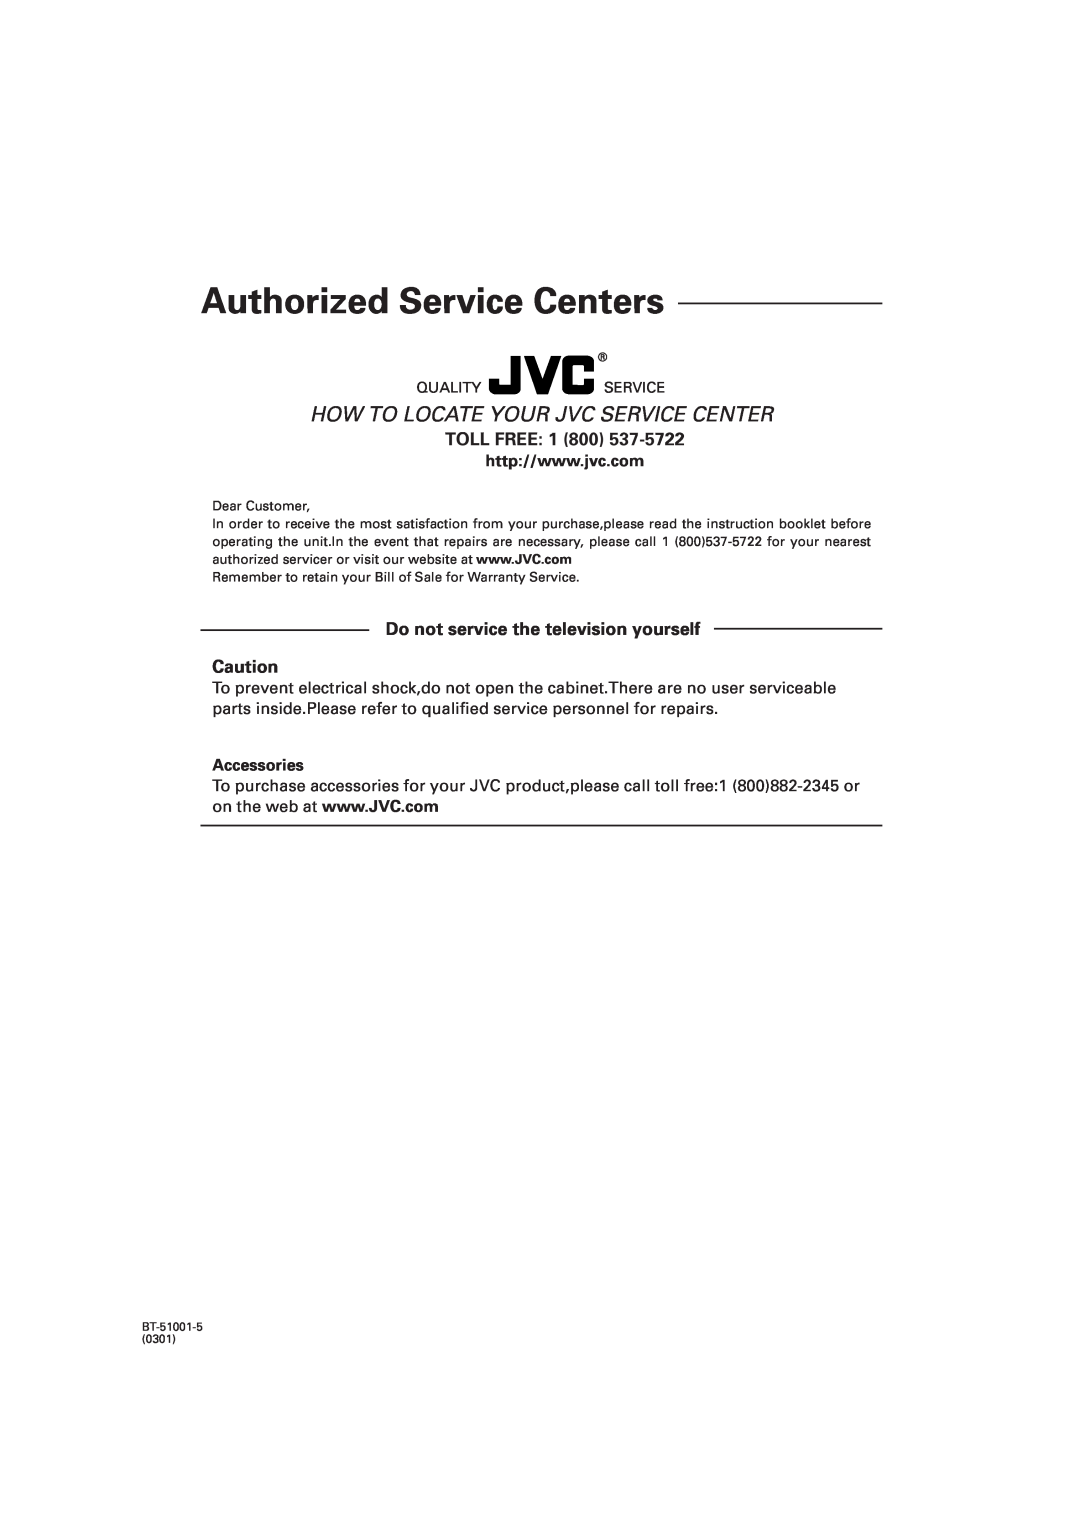 JVC MX-GA77, MX-GT88, SP-MXGT88 Toll Free, Do not service the television yourself, Authorized Service Centers, Accessories 